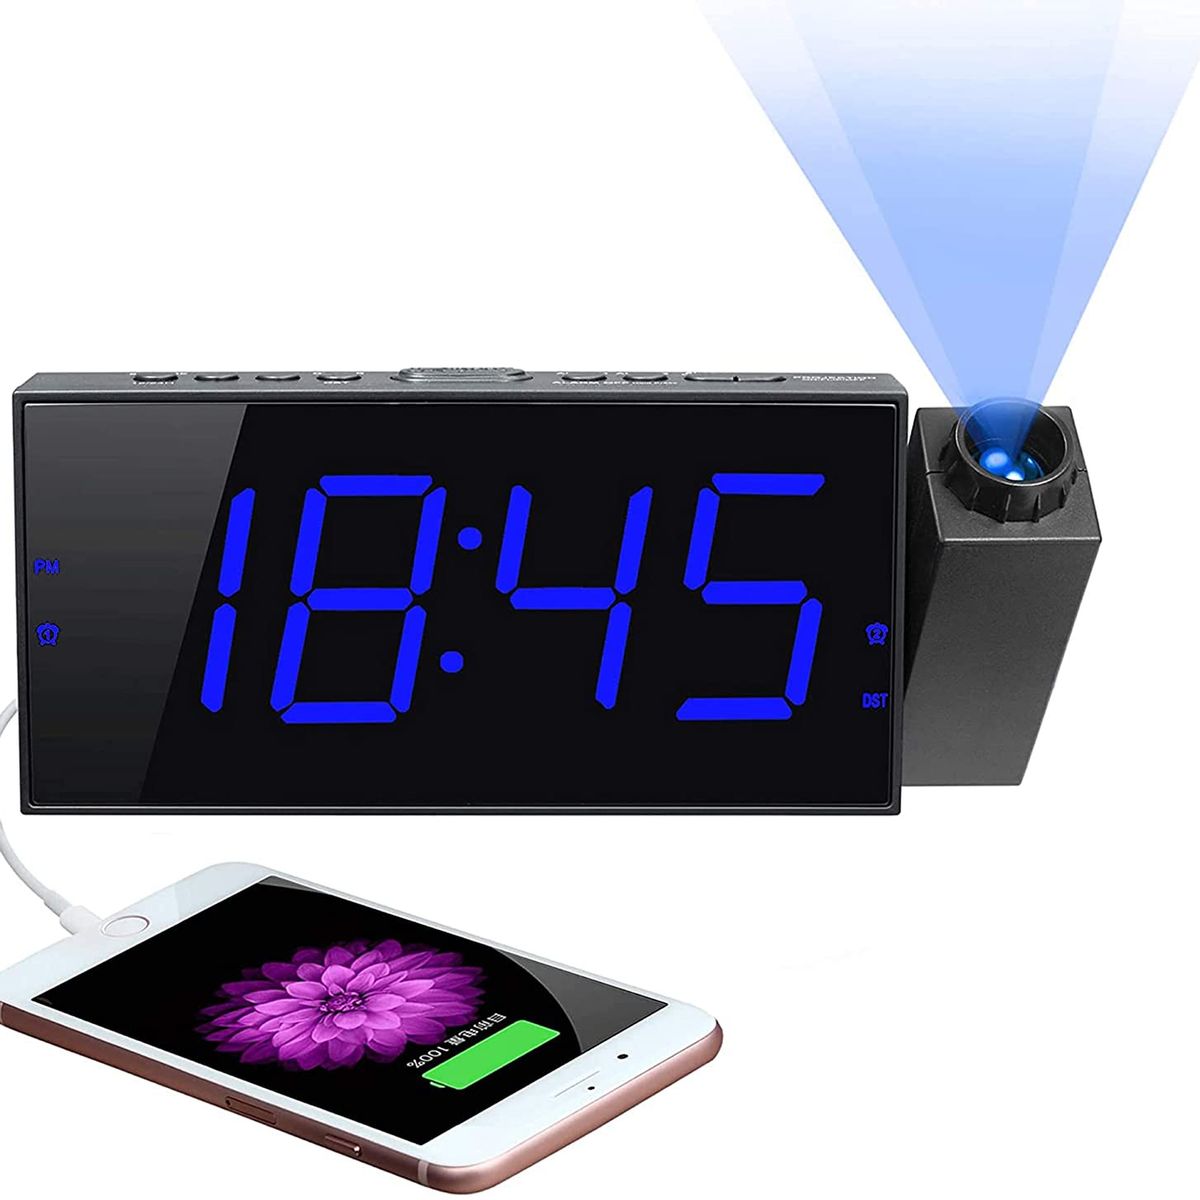 Projection Digital Alarm Clock on Ceiling Wall LED Alarm Clock for Bedrooms with USB Charger Port,180°Projector,Snooze,DST,Dimmer,Dual Loud Alarm Clock for Heavy Sleeper Adults Kids